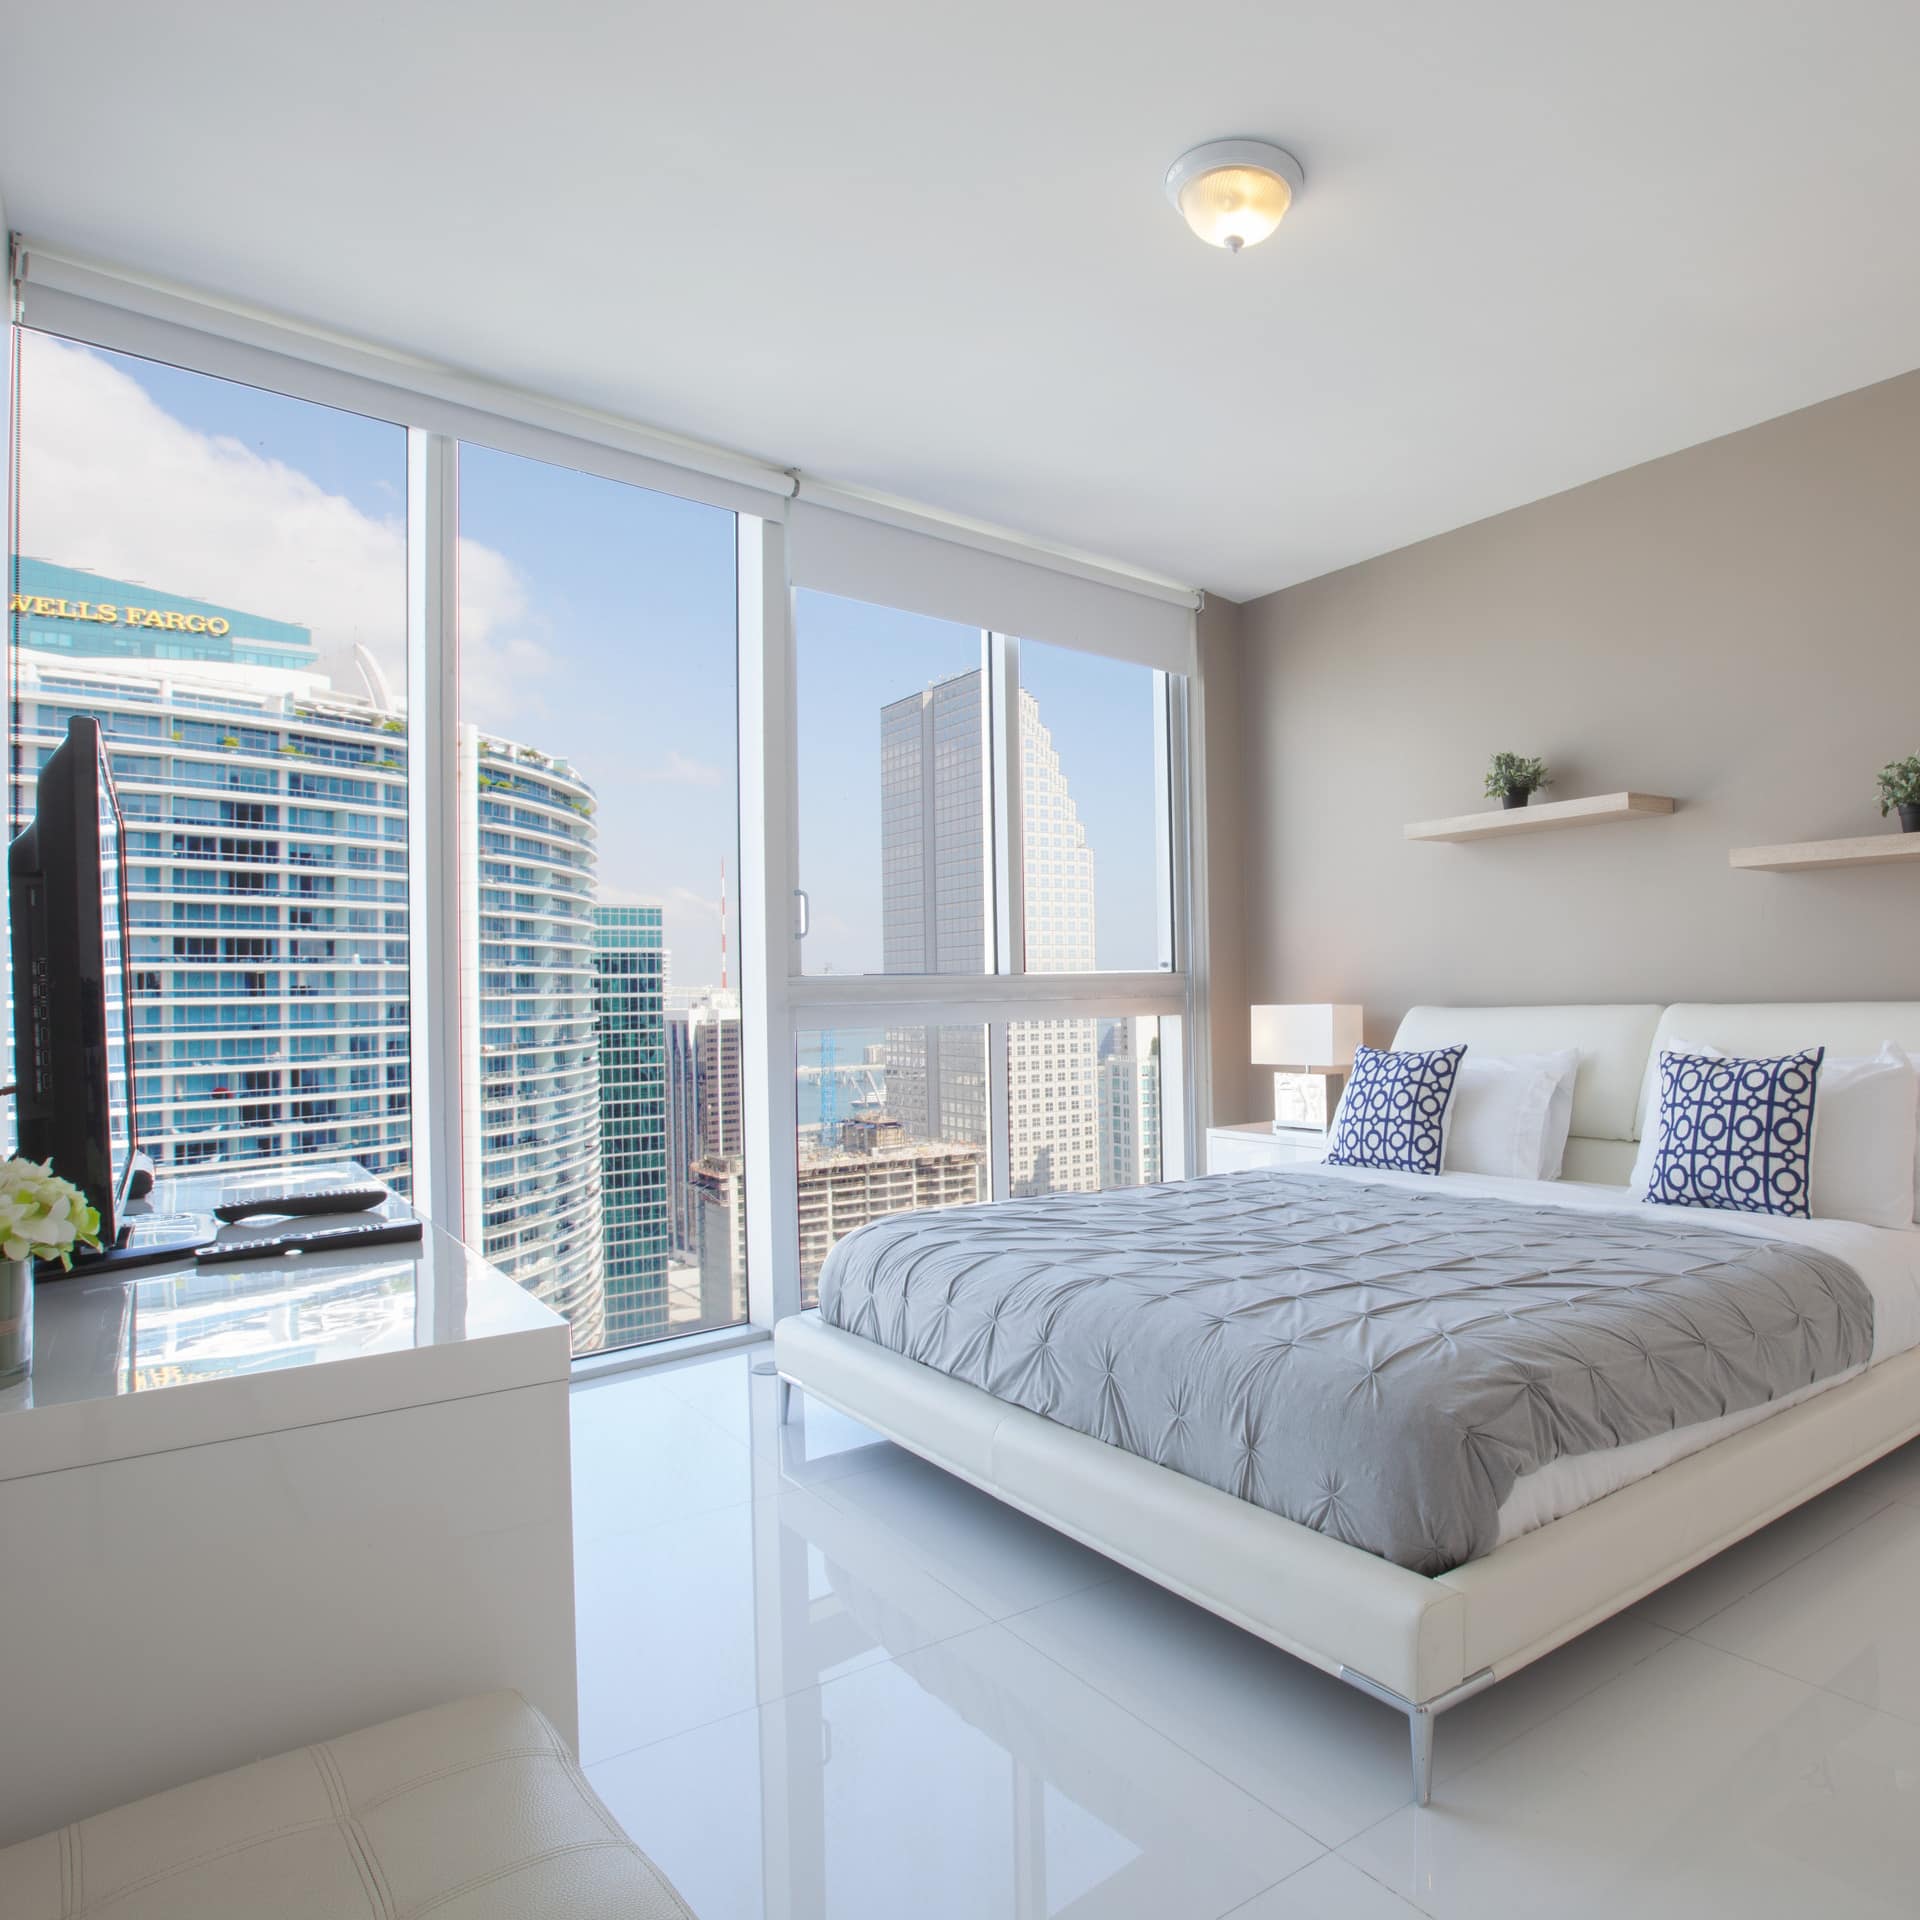 A furnished white bedroom with floor-to-ceiling windows providing views of skyscrapers